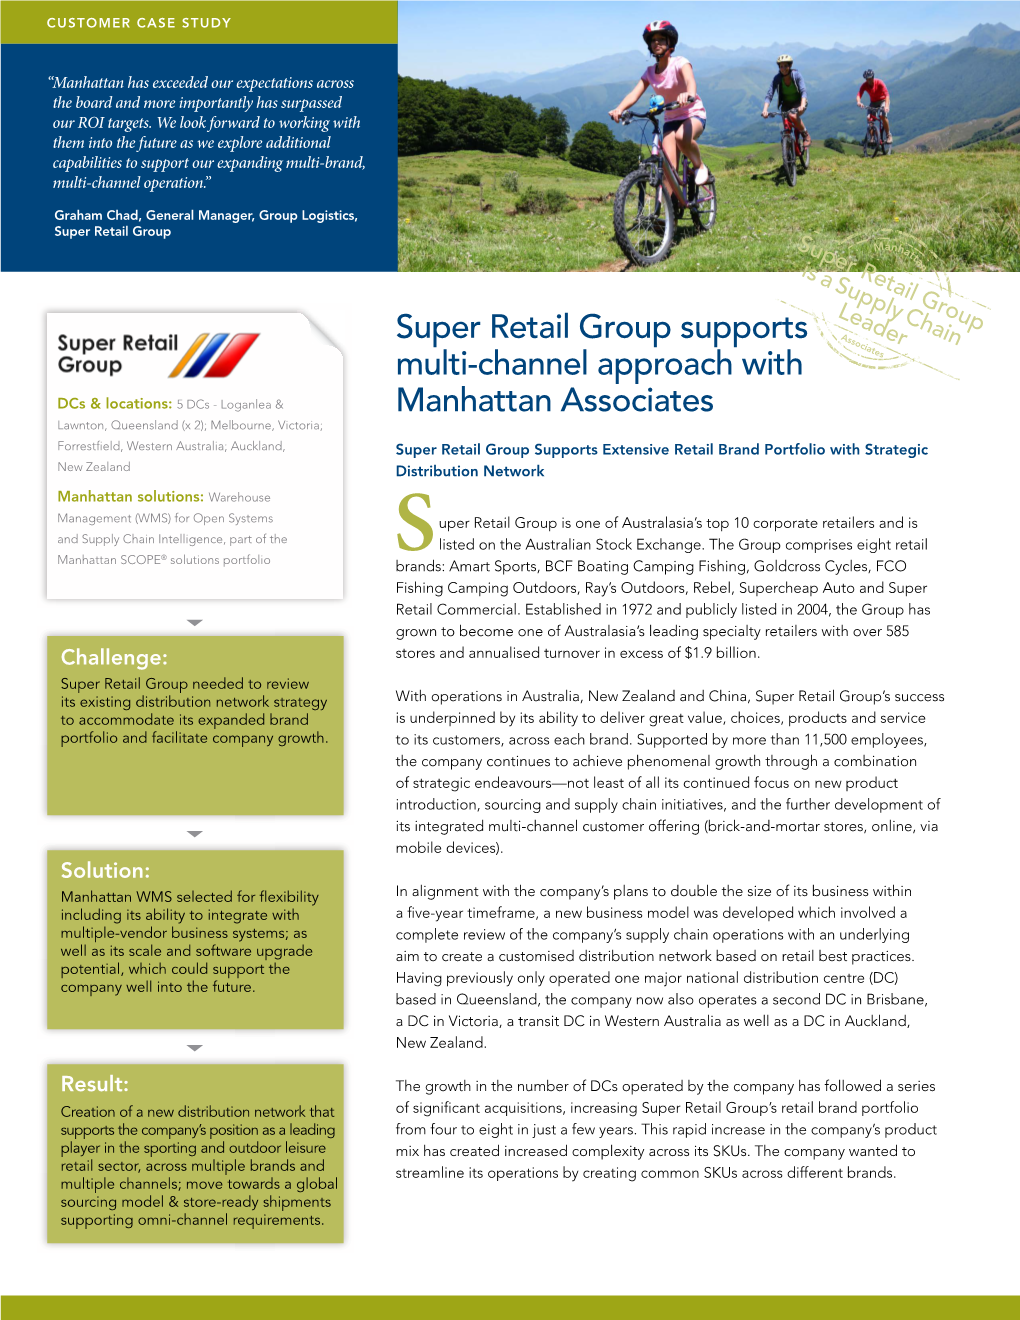 Super Retail Group Supports Multi-Channel Approach With